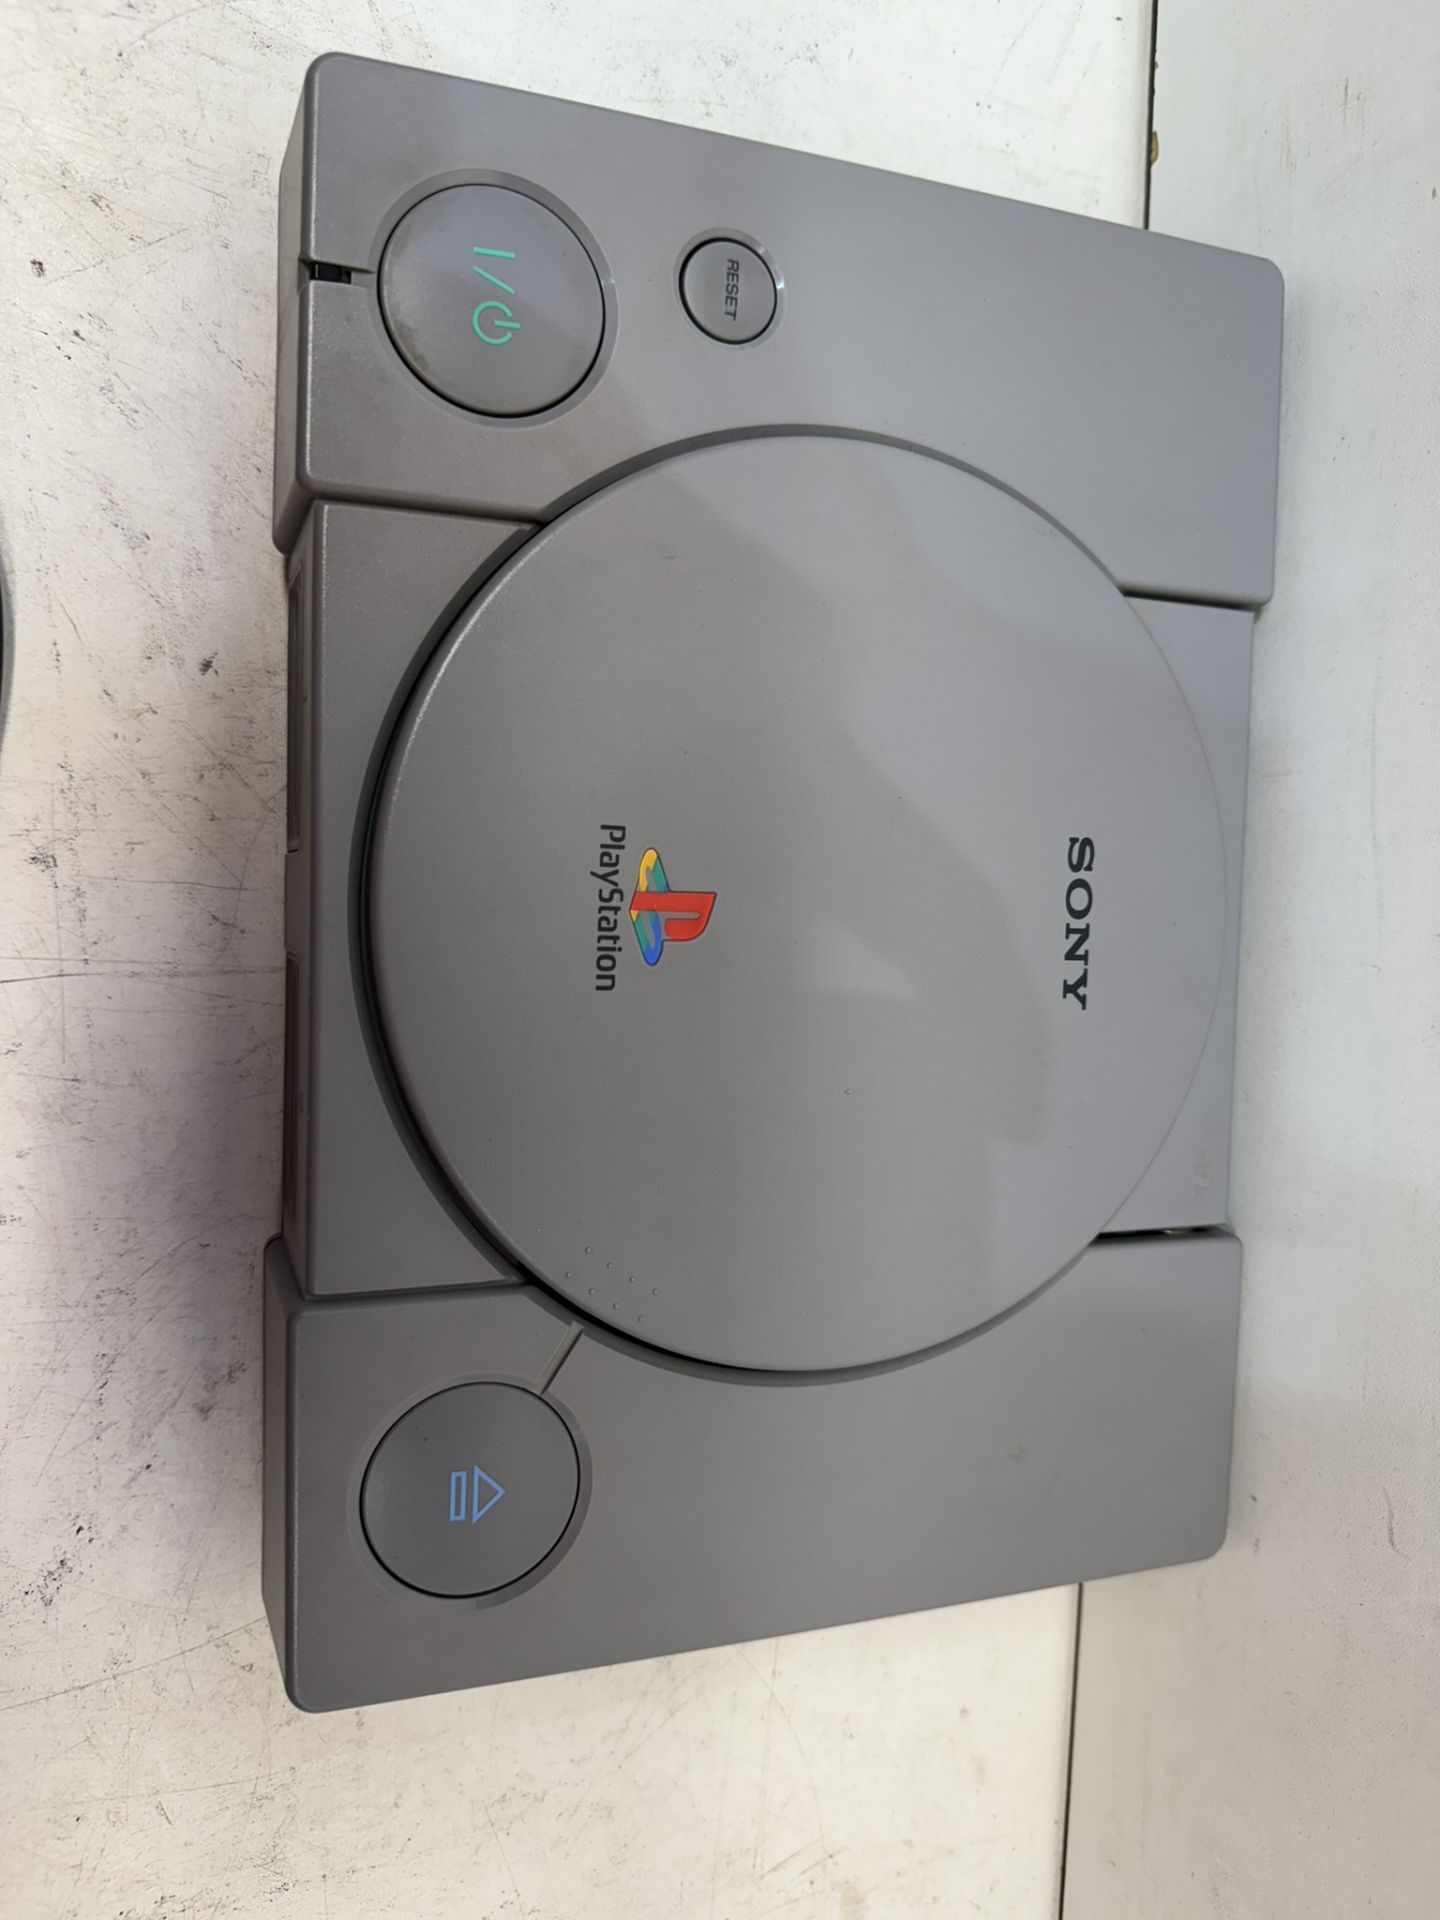 Sony PlayStation 1 Console - Image 2 of 3